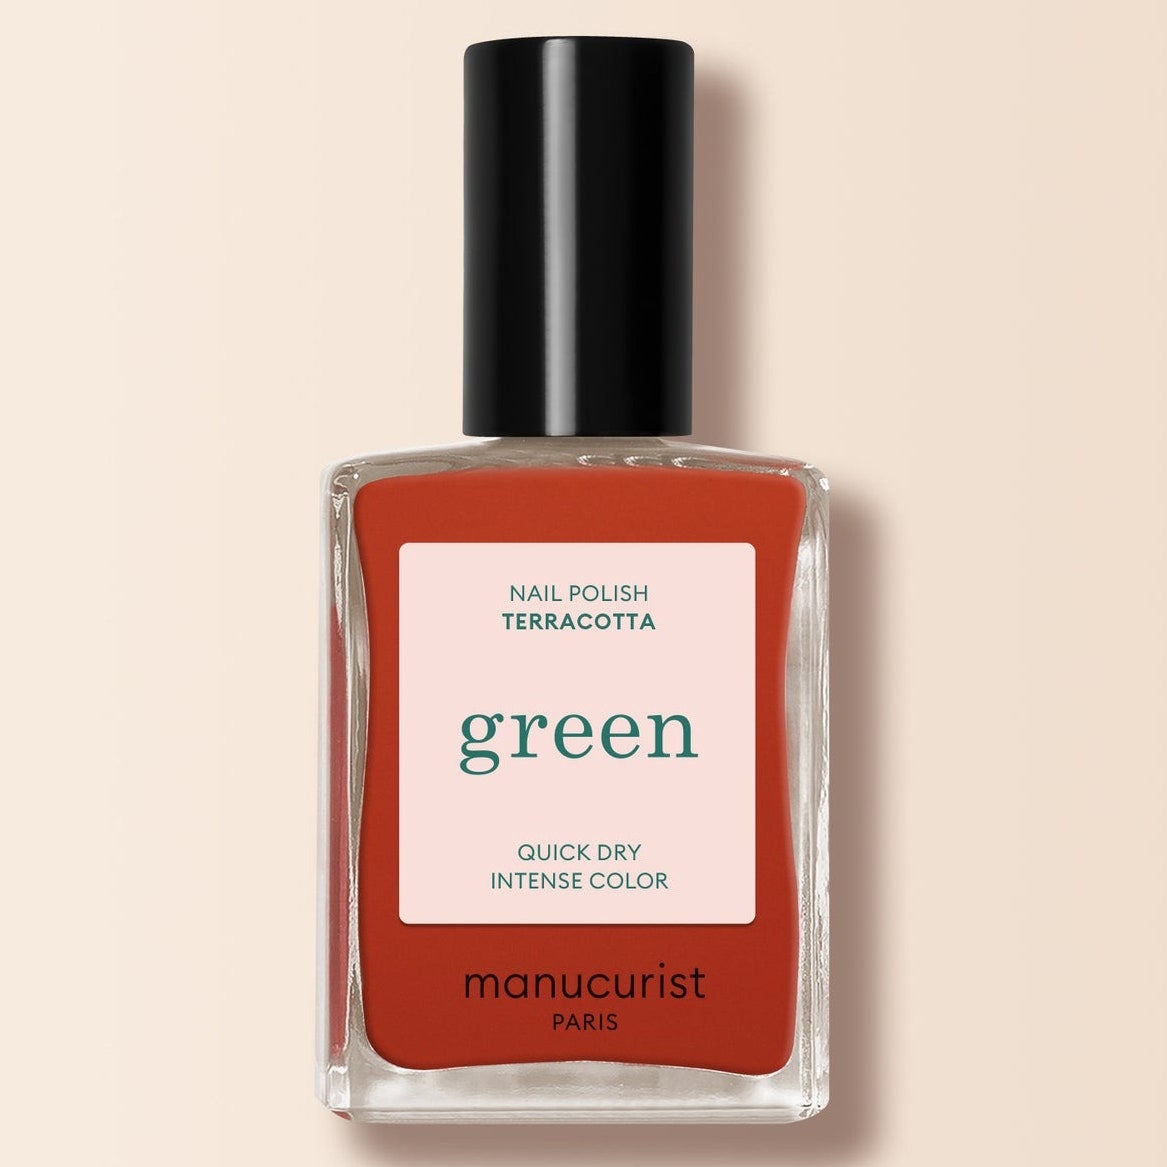 Manucurist Paris Green Natural Nail Polish in Terracotta square bottle of terracotta nail polish with black cap on white background